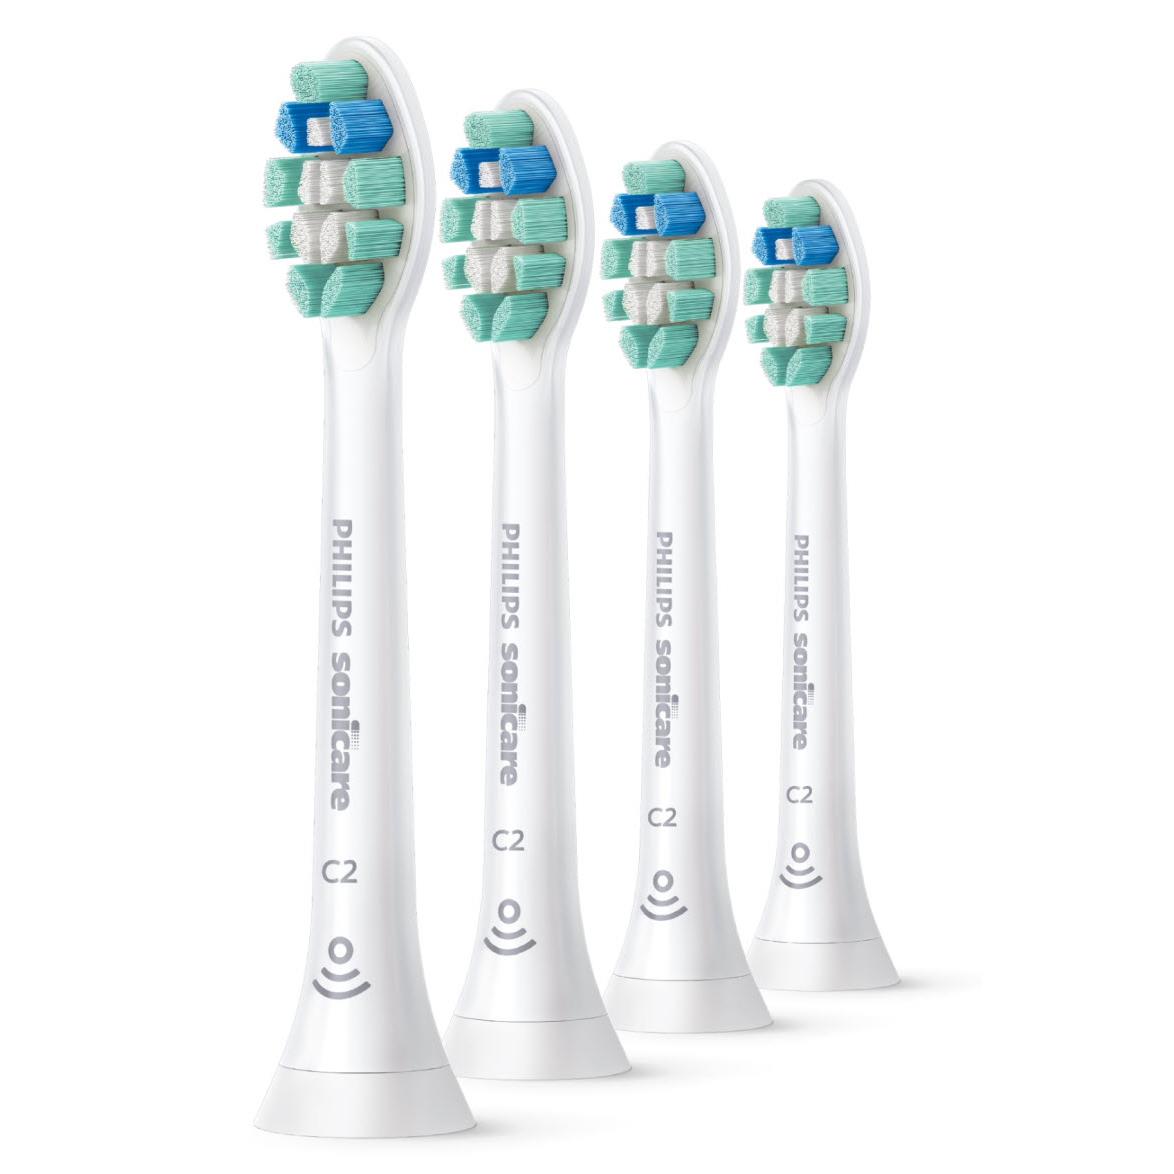 philips sonicare c2 optimal plaque defence standard brush heads (white) [4-pack]